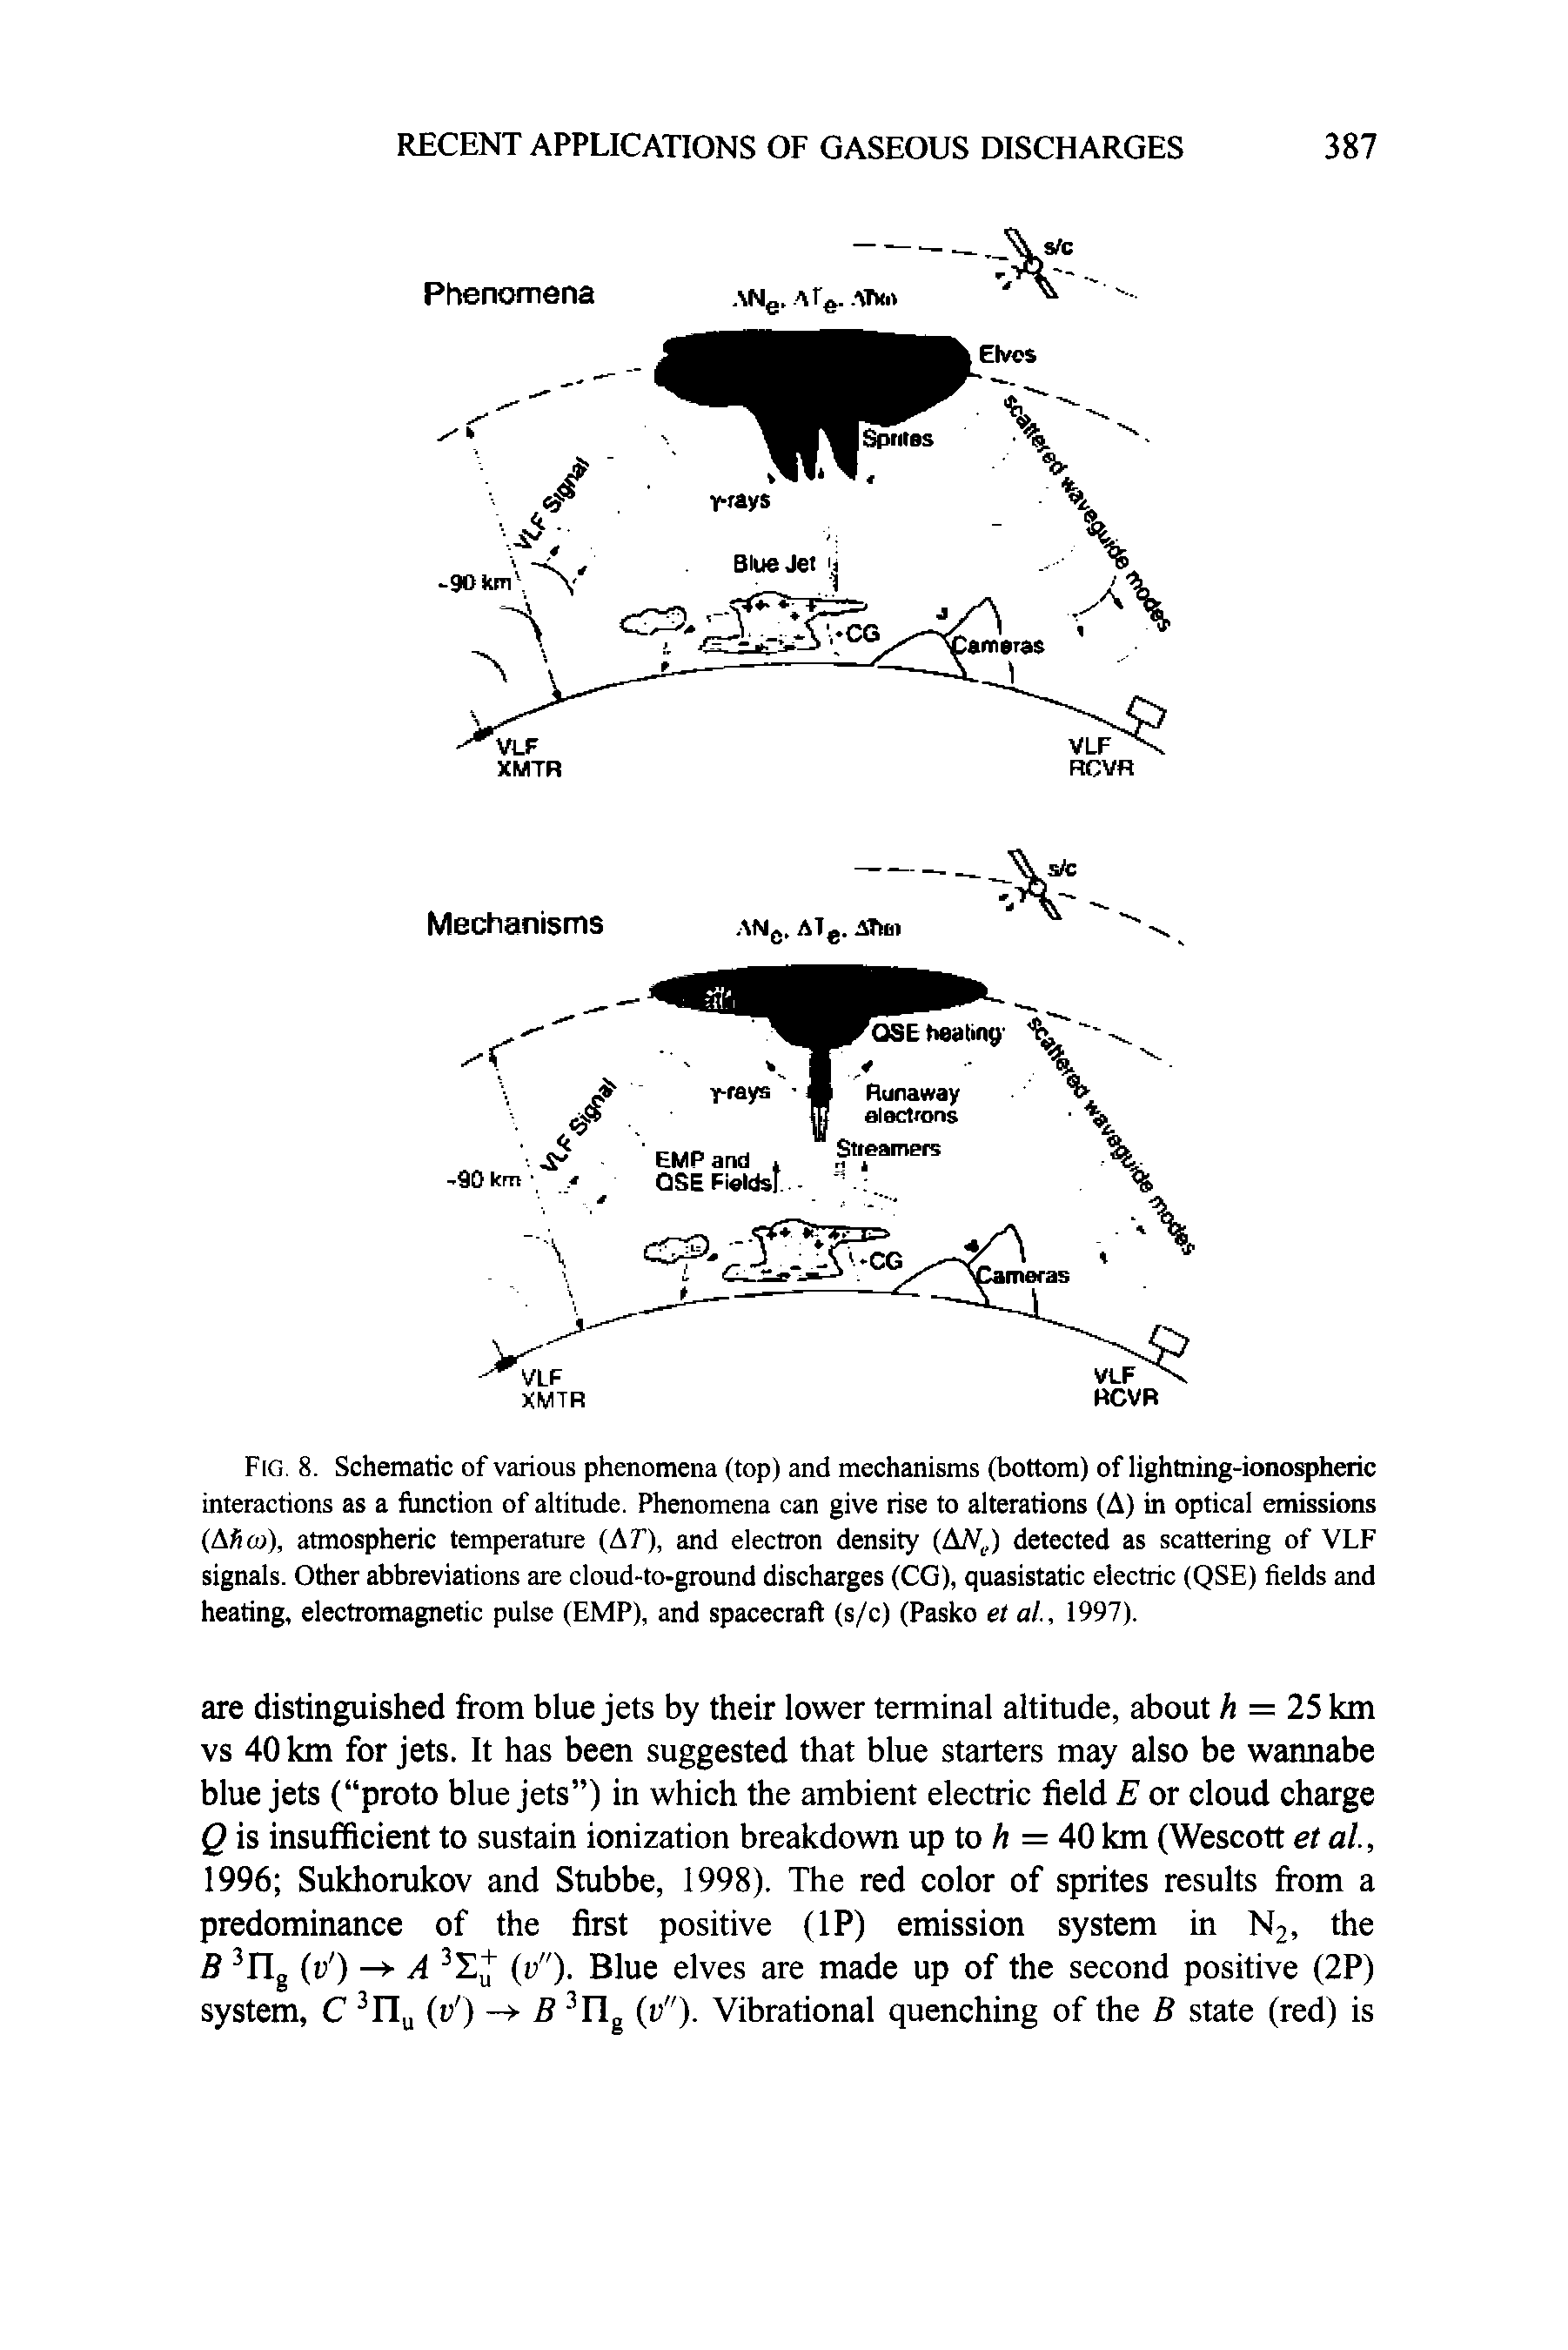 Fig. 8. Schematic of various phenomena (top) and mechanisms (bottom) of lightning-ionospheric interactions as a function of altitude. Phenomena can give rise to alterations (A) in optical emissions (ASco), atmospheric temperature (AT), and electron density (AAf, ) detected as scattering of VLF signals. Other abbreviations are cloud-to-ground discharges (CG), quasistatic electric (QSE) fields and heating, electromagnetic pulse (BMP), and spacecraft (s/c) (Pasko et at., 1997).